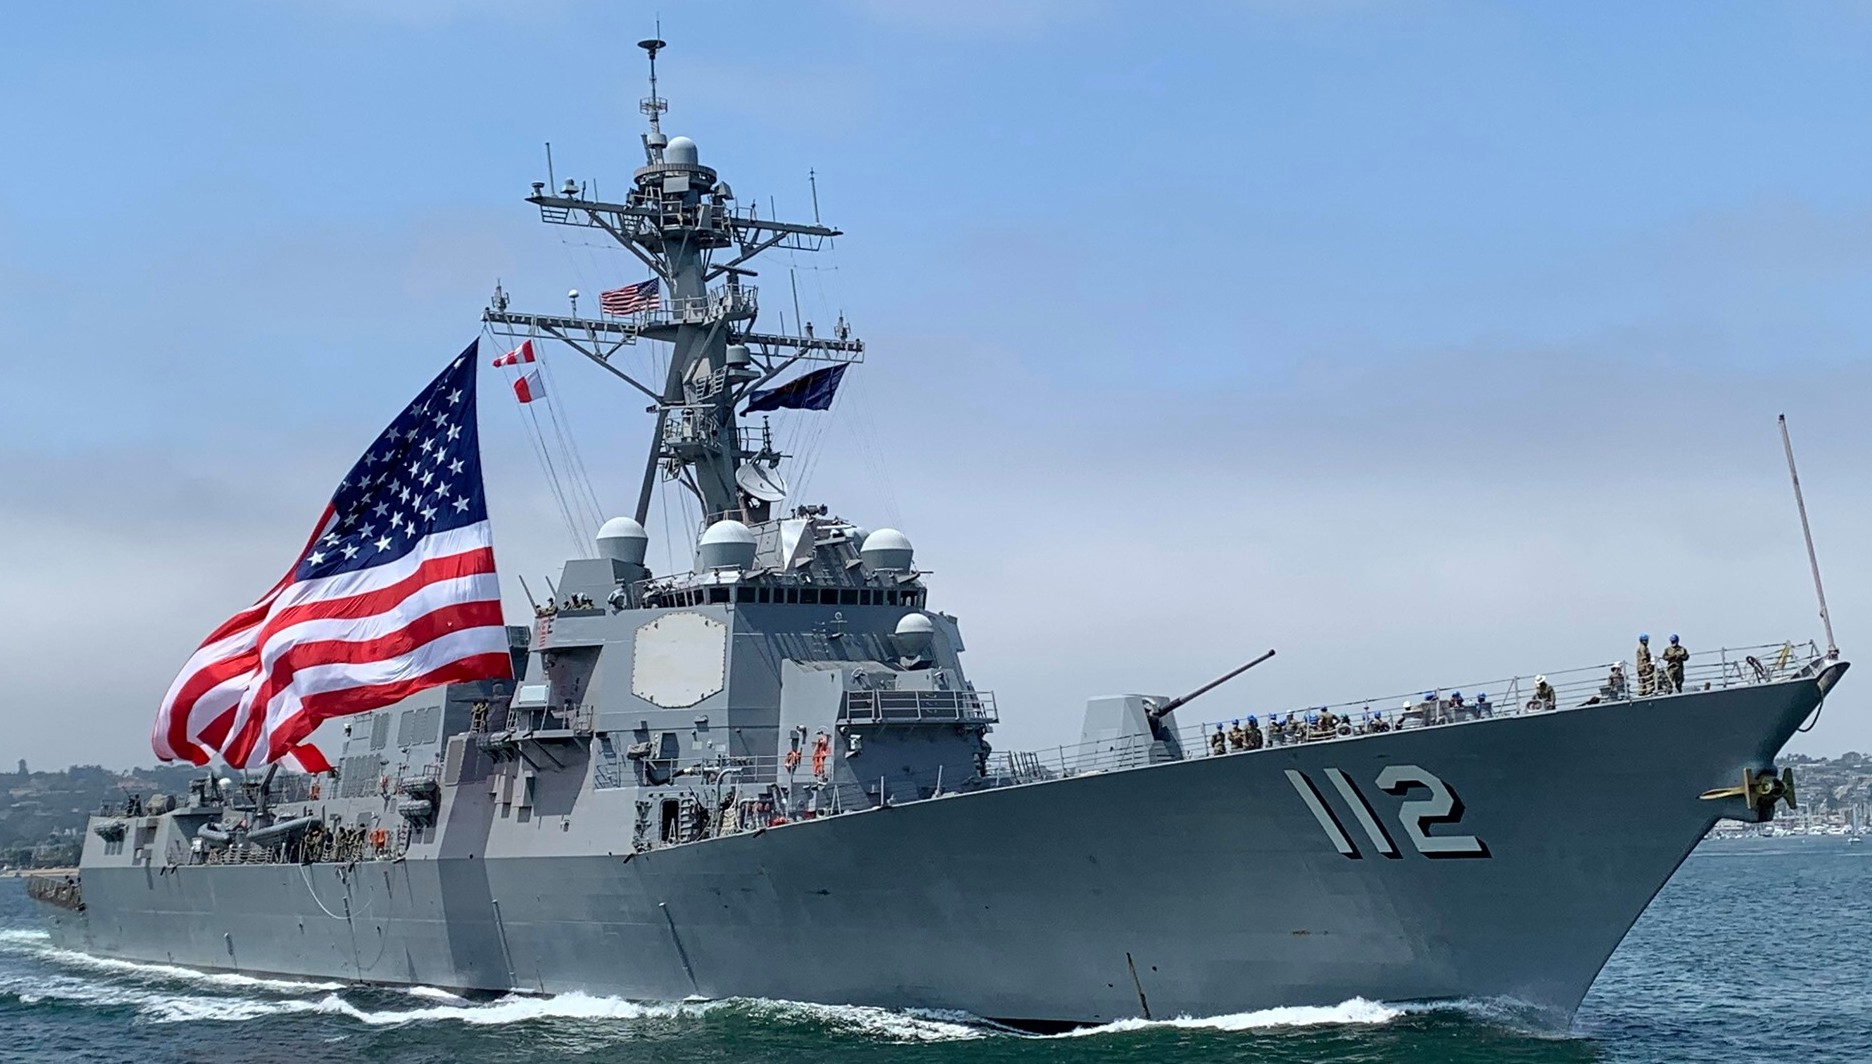 ddg-112 uss michael murphy arleigh burke class guided missile destroyer aegis us navy 71